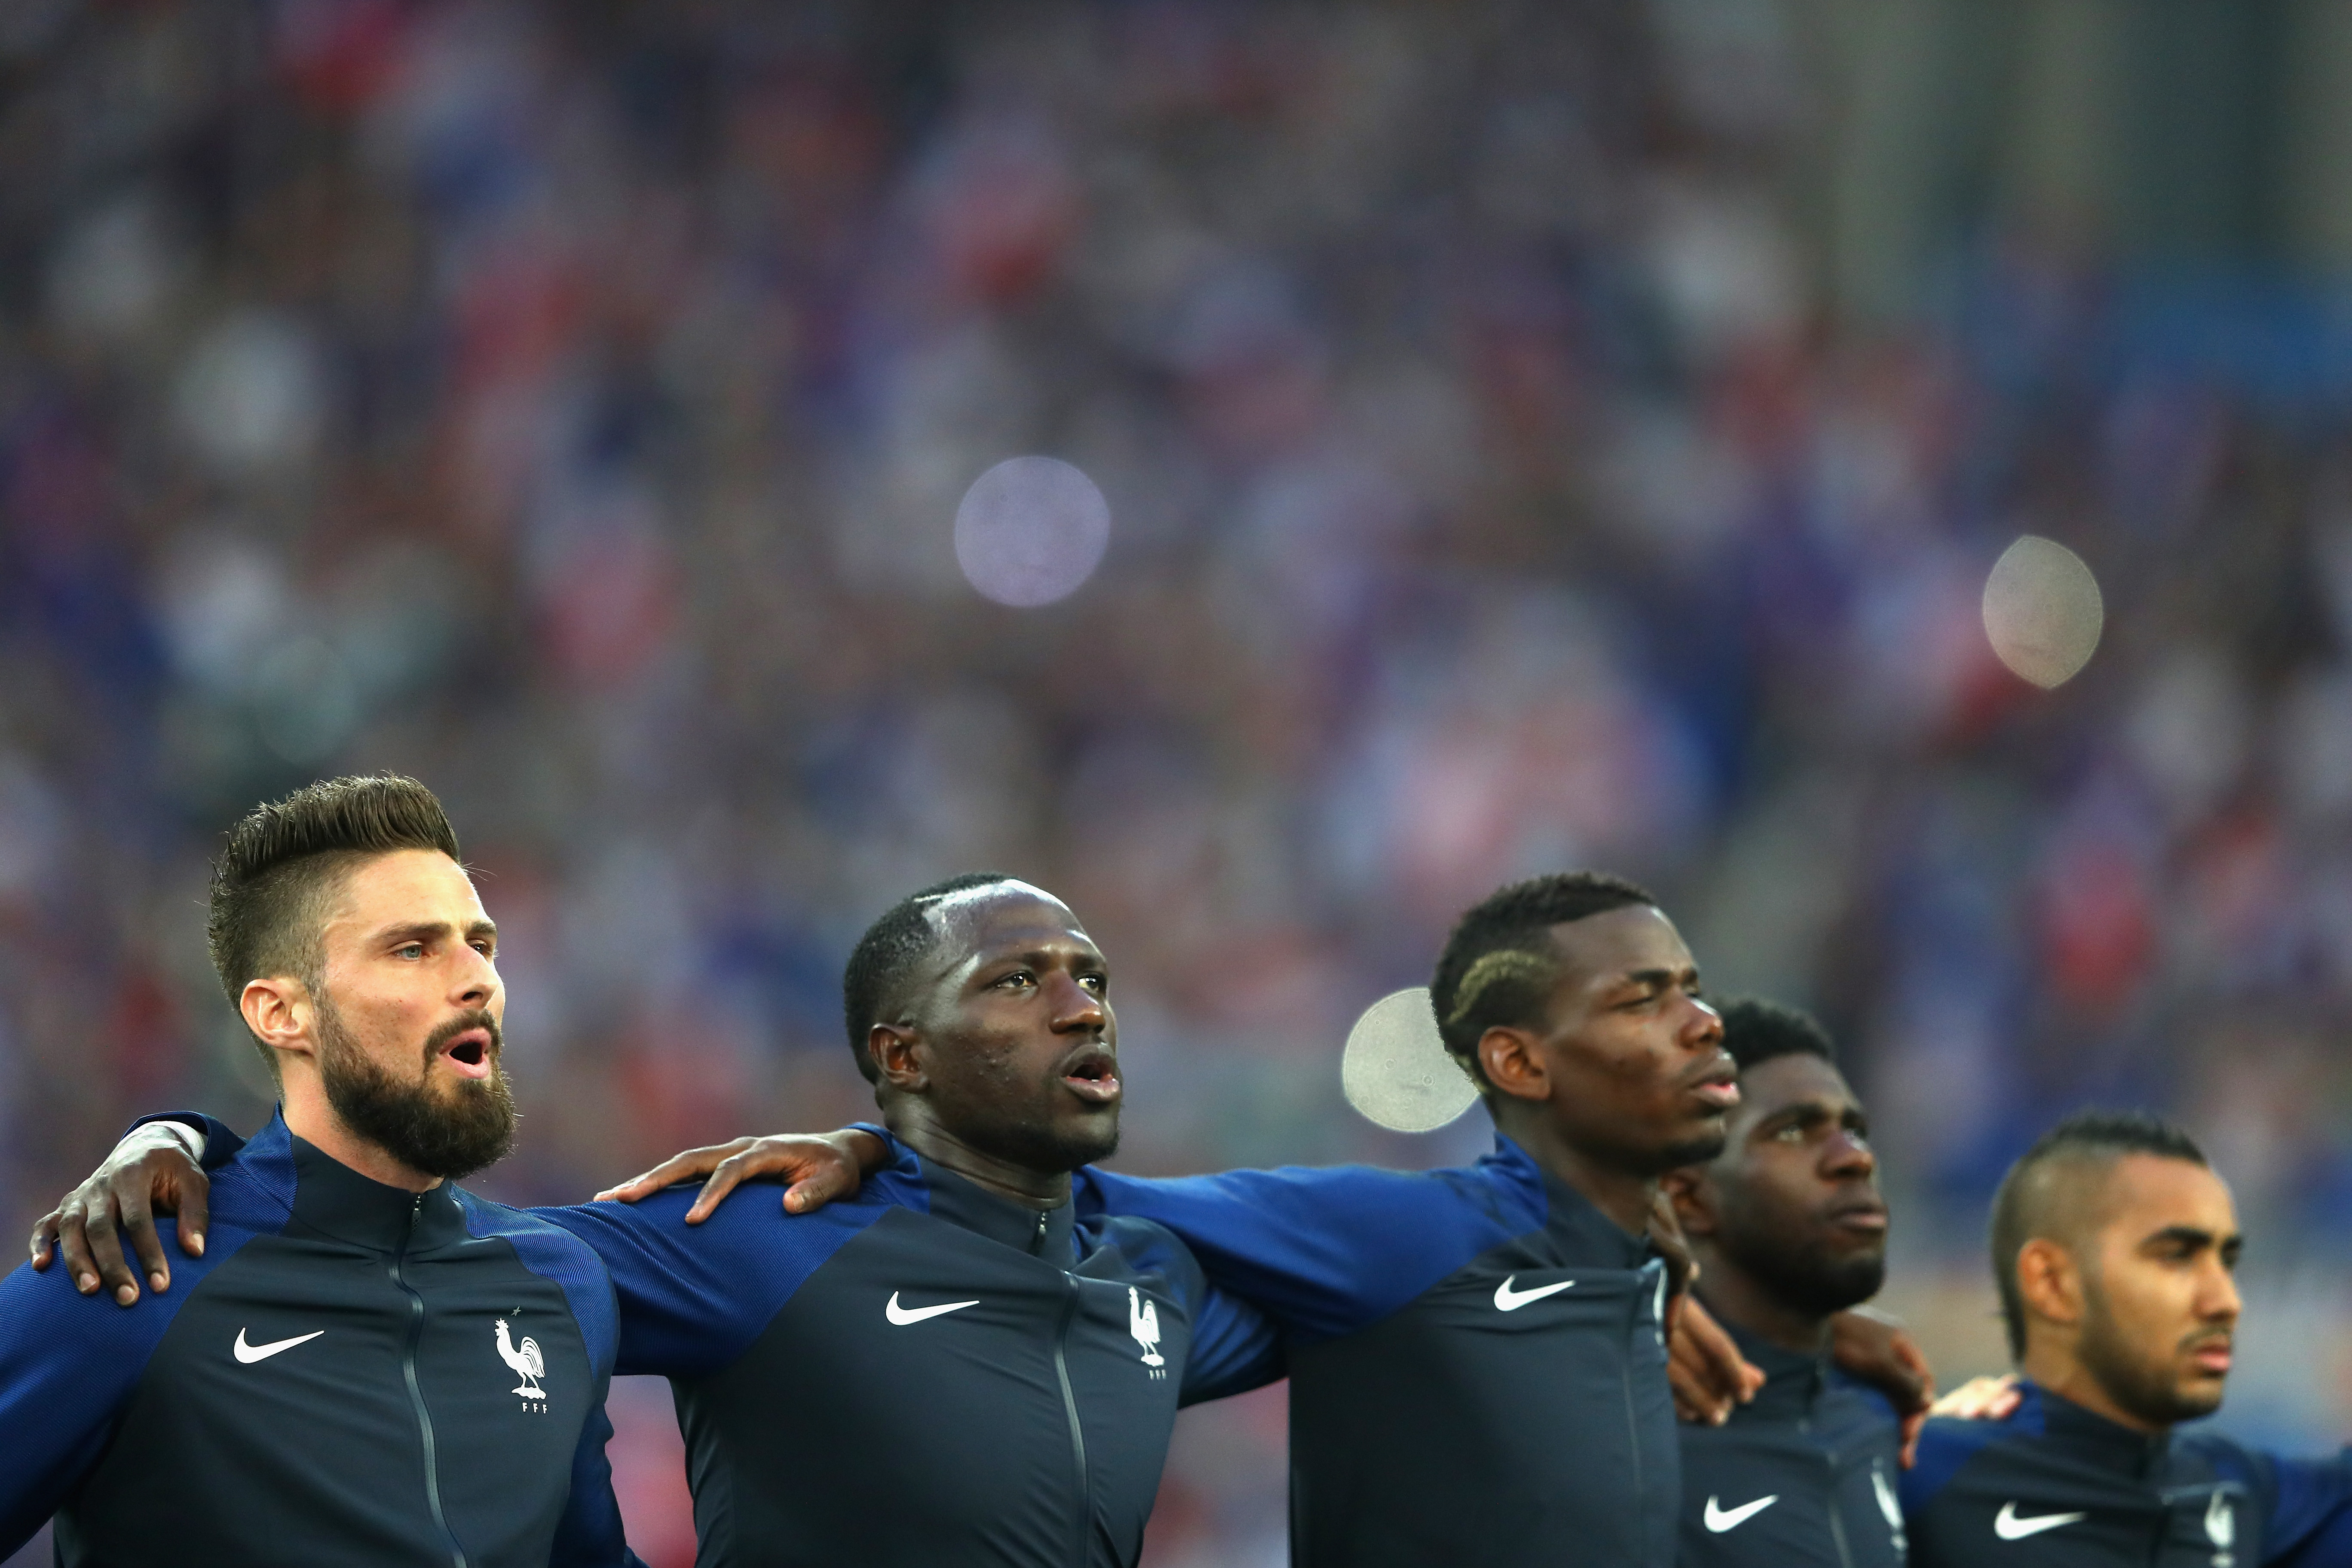 MARSEILLE, FRANCE - JULY 07: (L to R) Olivier Giroud, Moussa Sissoko, Paul Pogba, Samuel Umtiti and Dimitri Payet of France line up for the national anthem prior to the UEFA EURO semi final match between Germany and France at Stade Velodrome on July 7, 2016 in Marseille, France.  (Photo by Lars Baron/Getty Images)